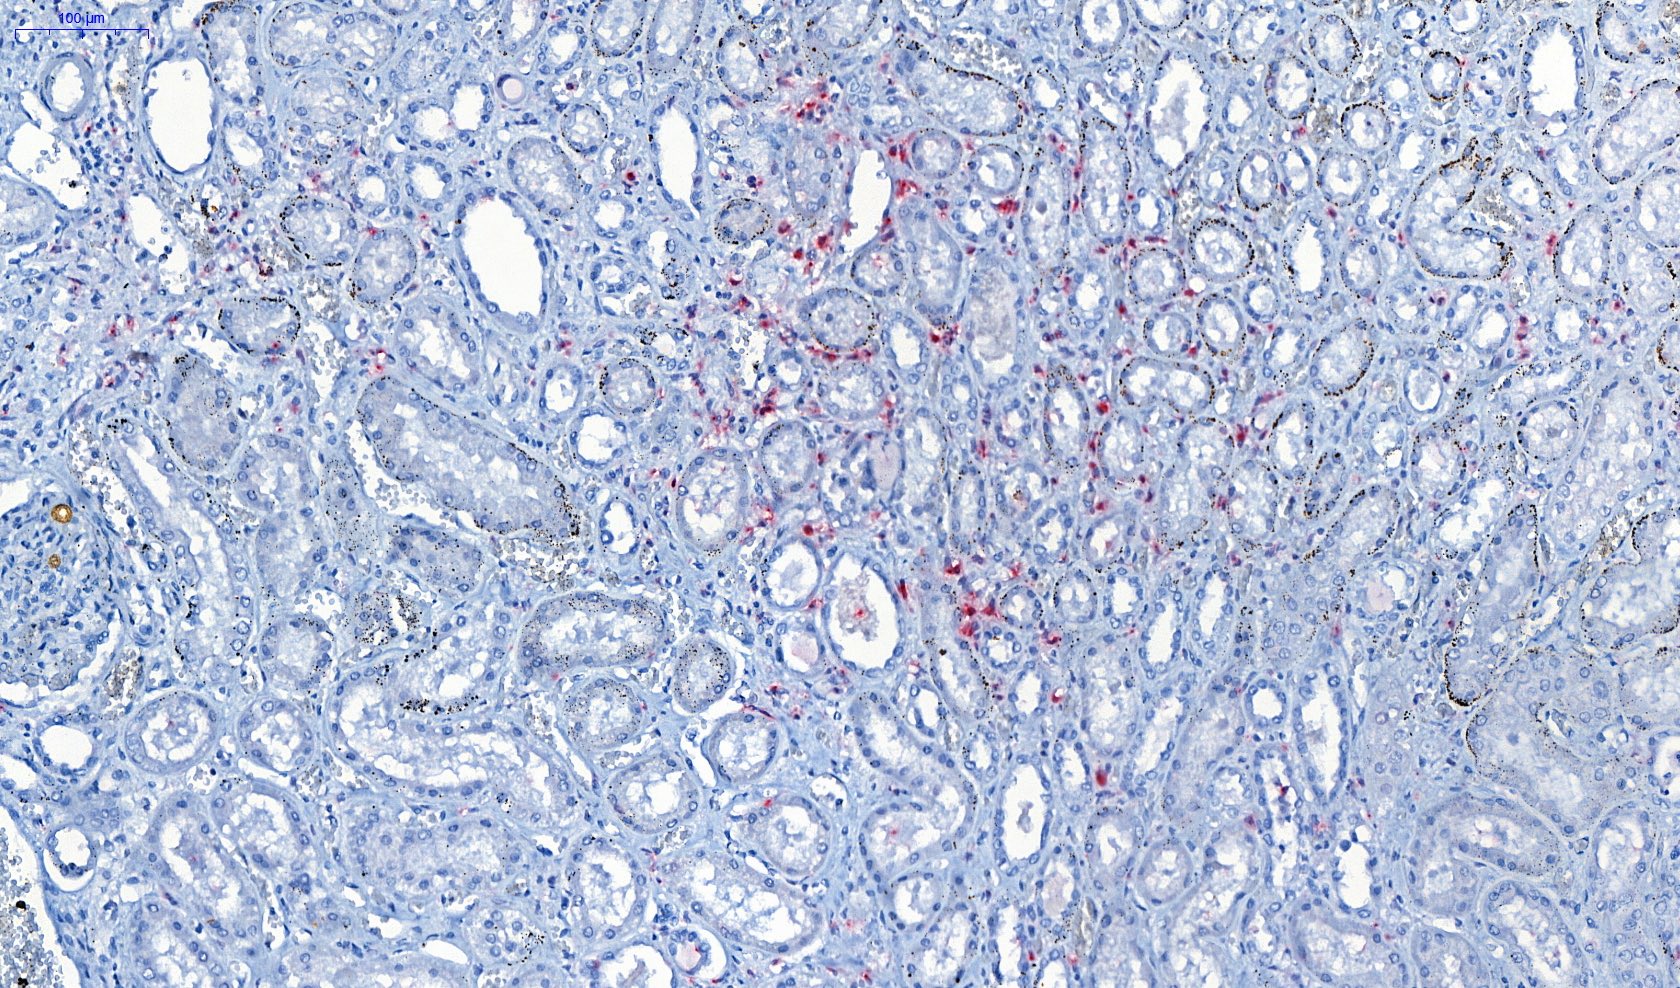 Renal lesion in leptospirosis (interstitial nephritis) - IHC